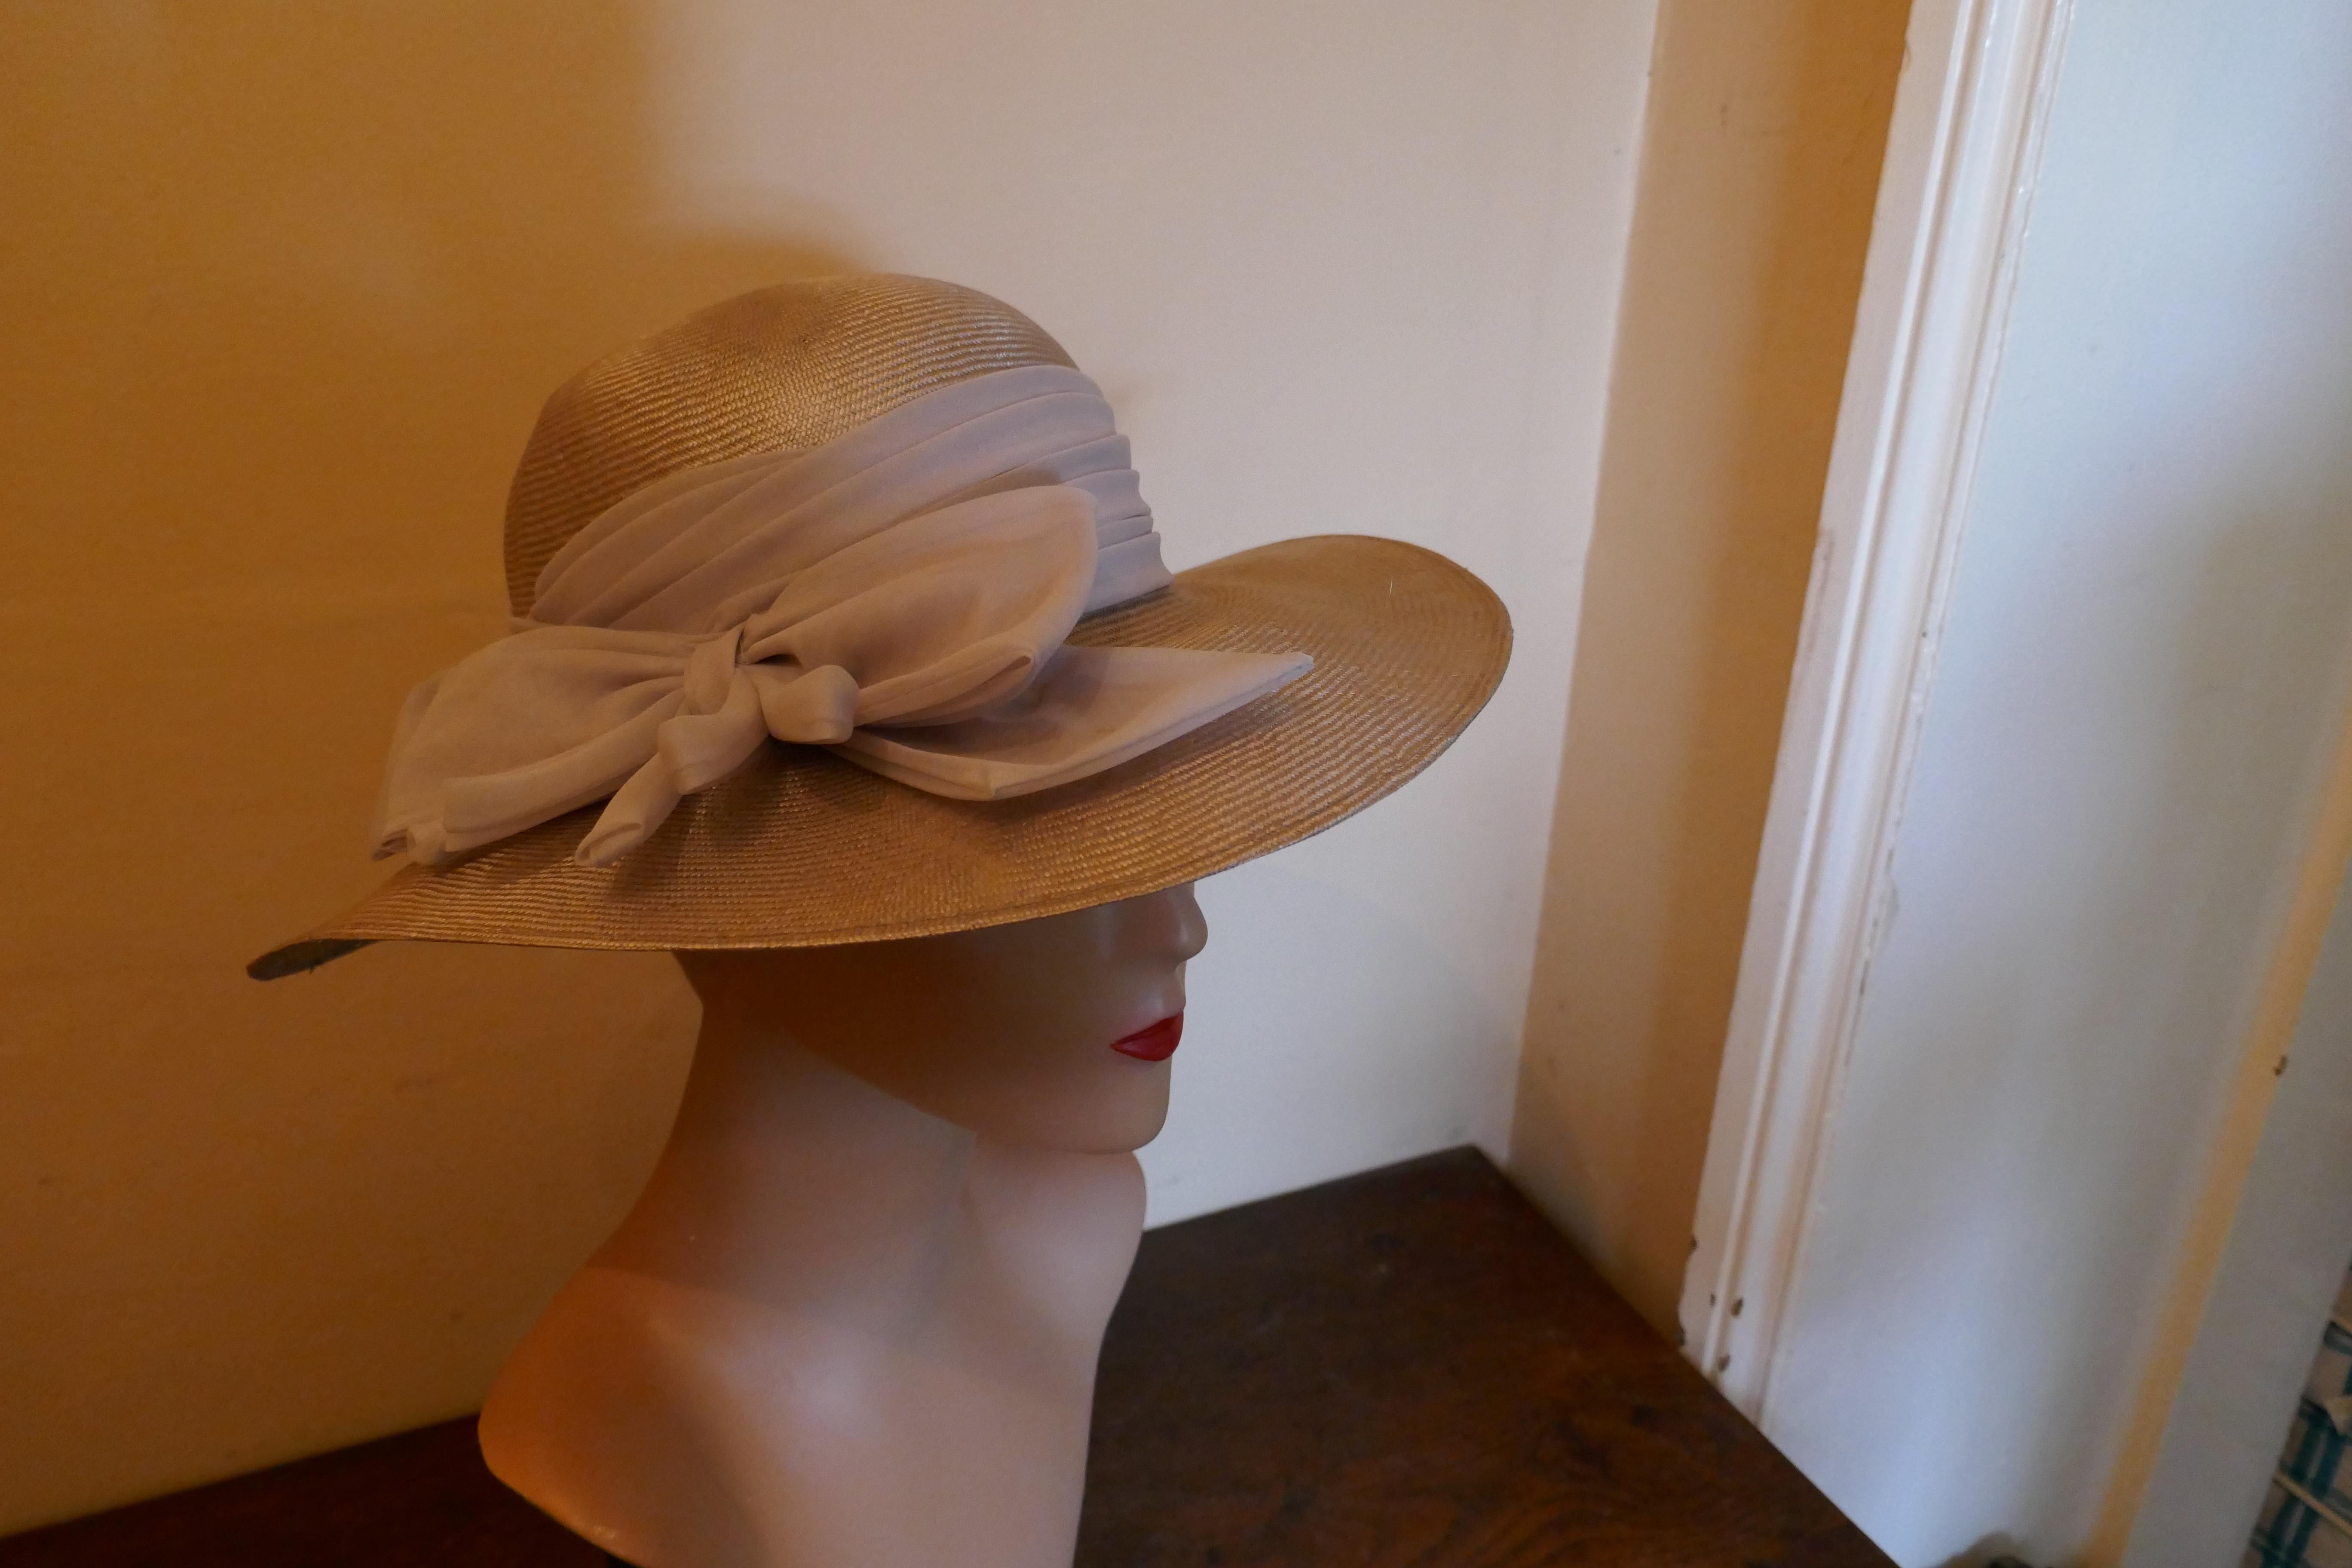 Original 1960s Straw Style Hat, Garden Party Chic

This gorgeous Hat is very light and made with fine shiny stiffened straw, it has beautiful pale lilac pleated band ties in a bow at the back 

This one is an exquisite design wear it anywhere and